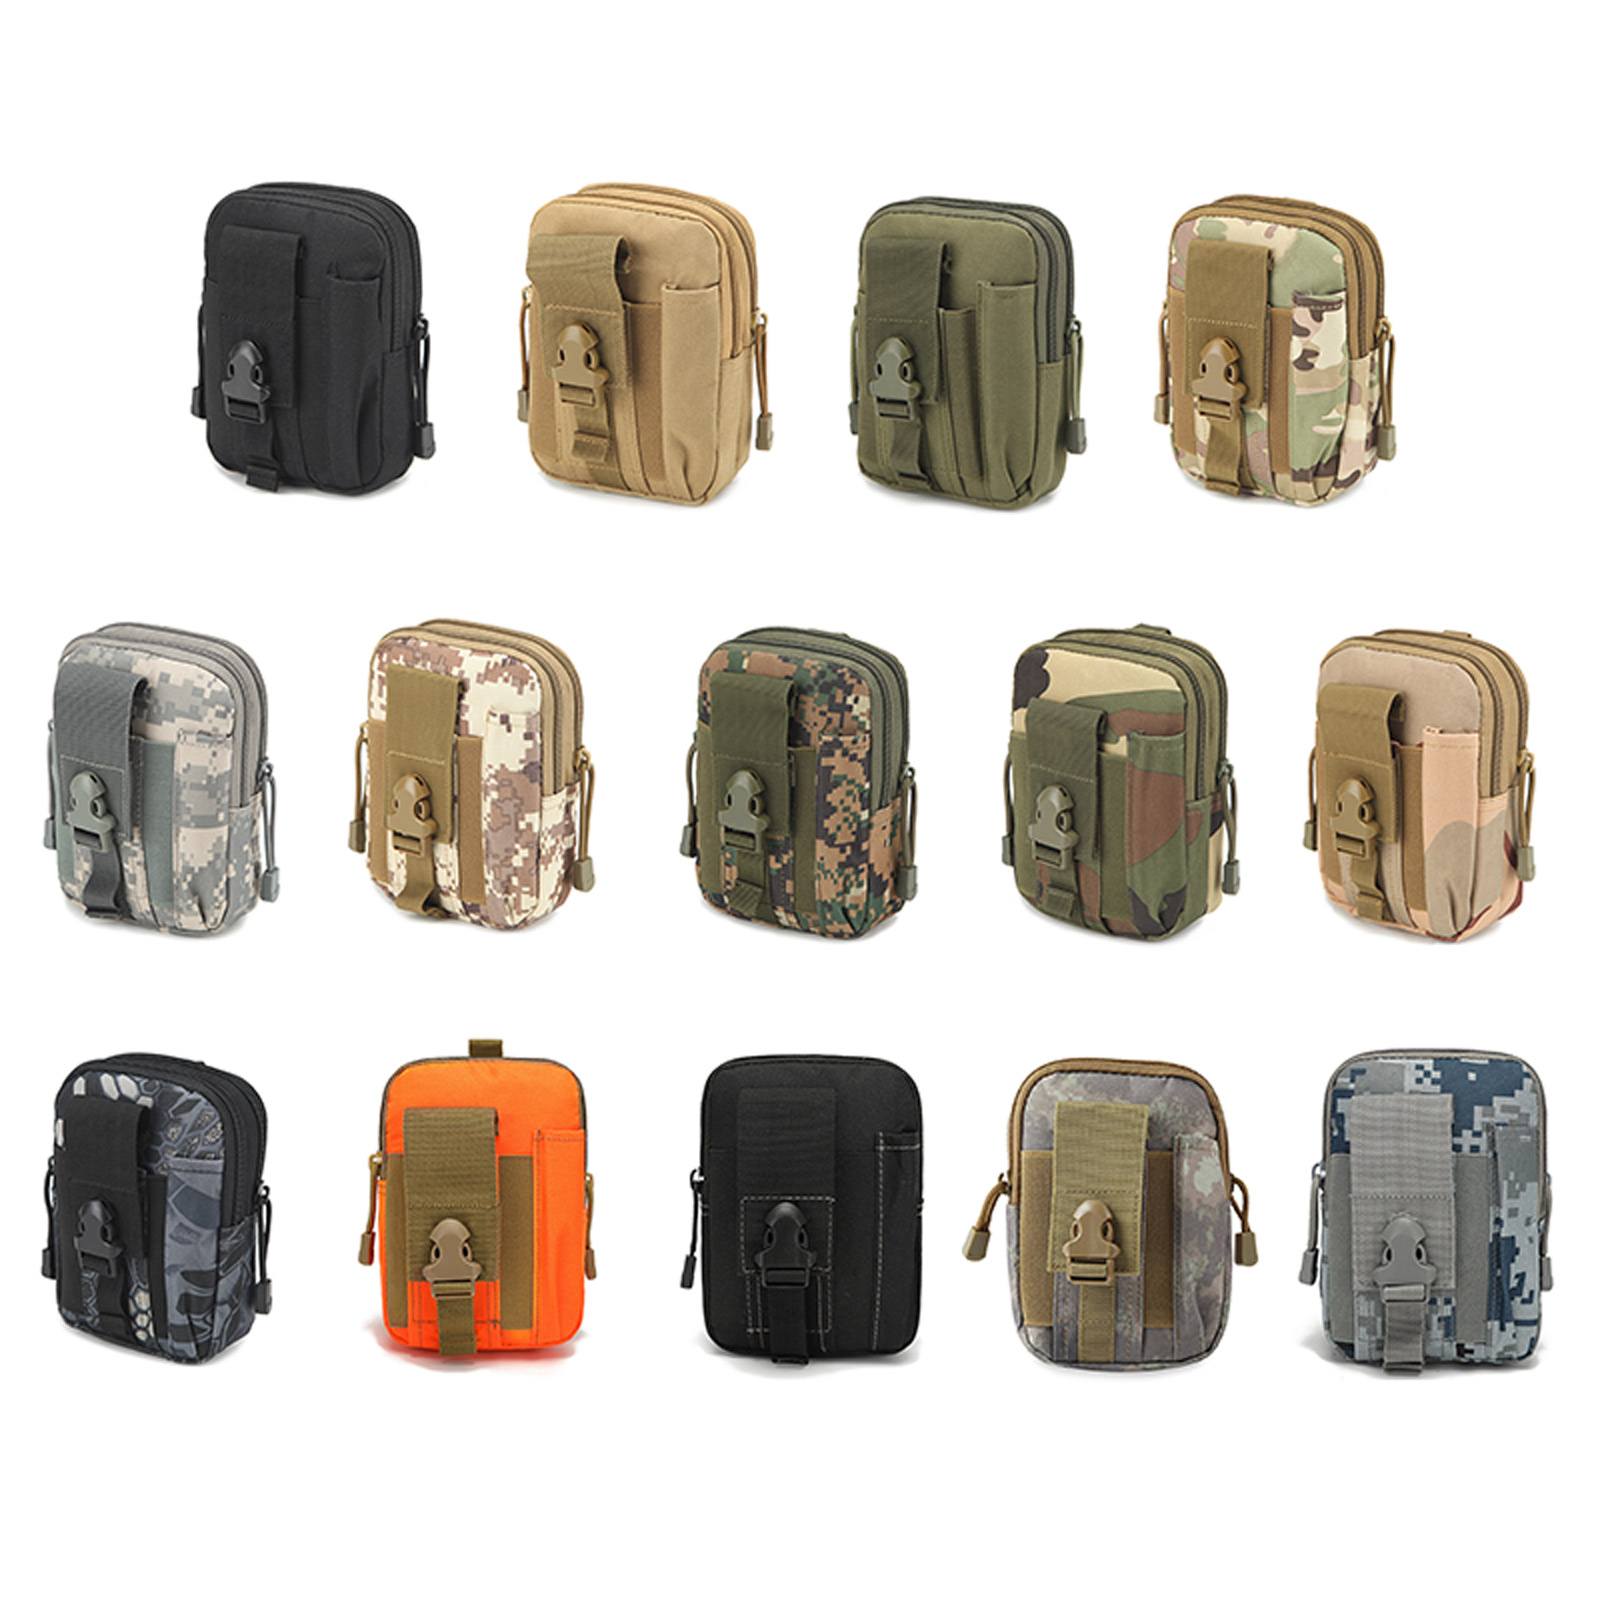 Sugeryy Mobile Phone Bag Pouch Belt Sling Chest Pack Hiking Outdoor Multi-Functional Camo Travel Camping Bags Tactical Backpack - image 3 of 5